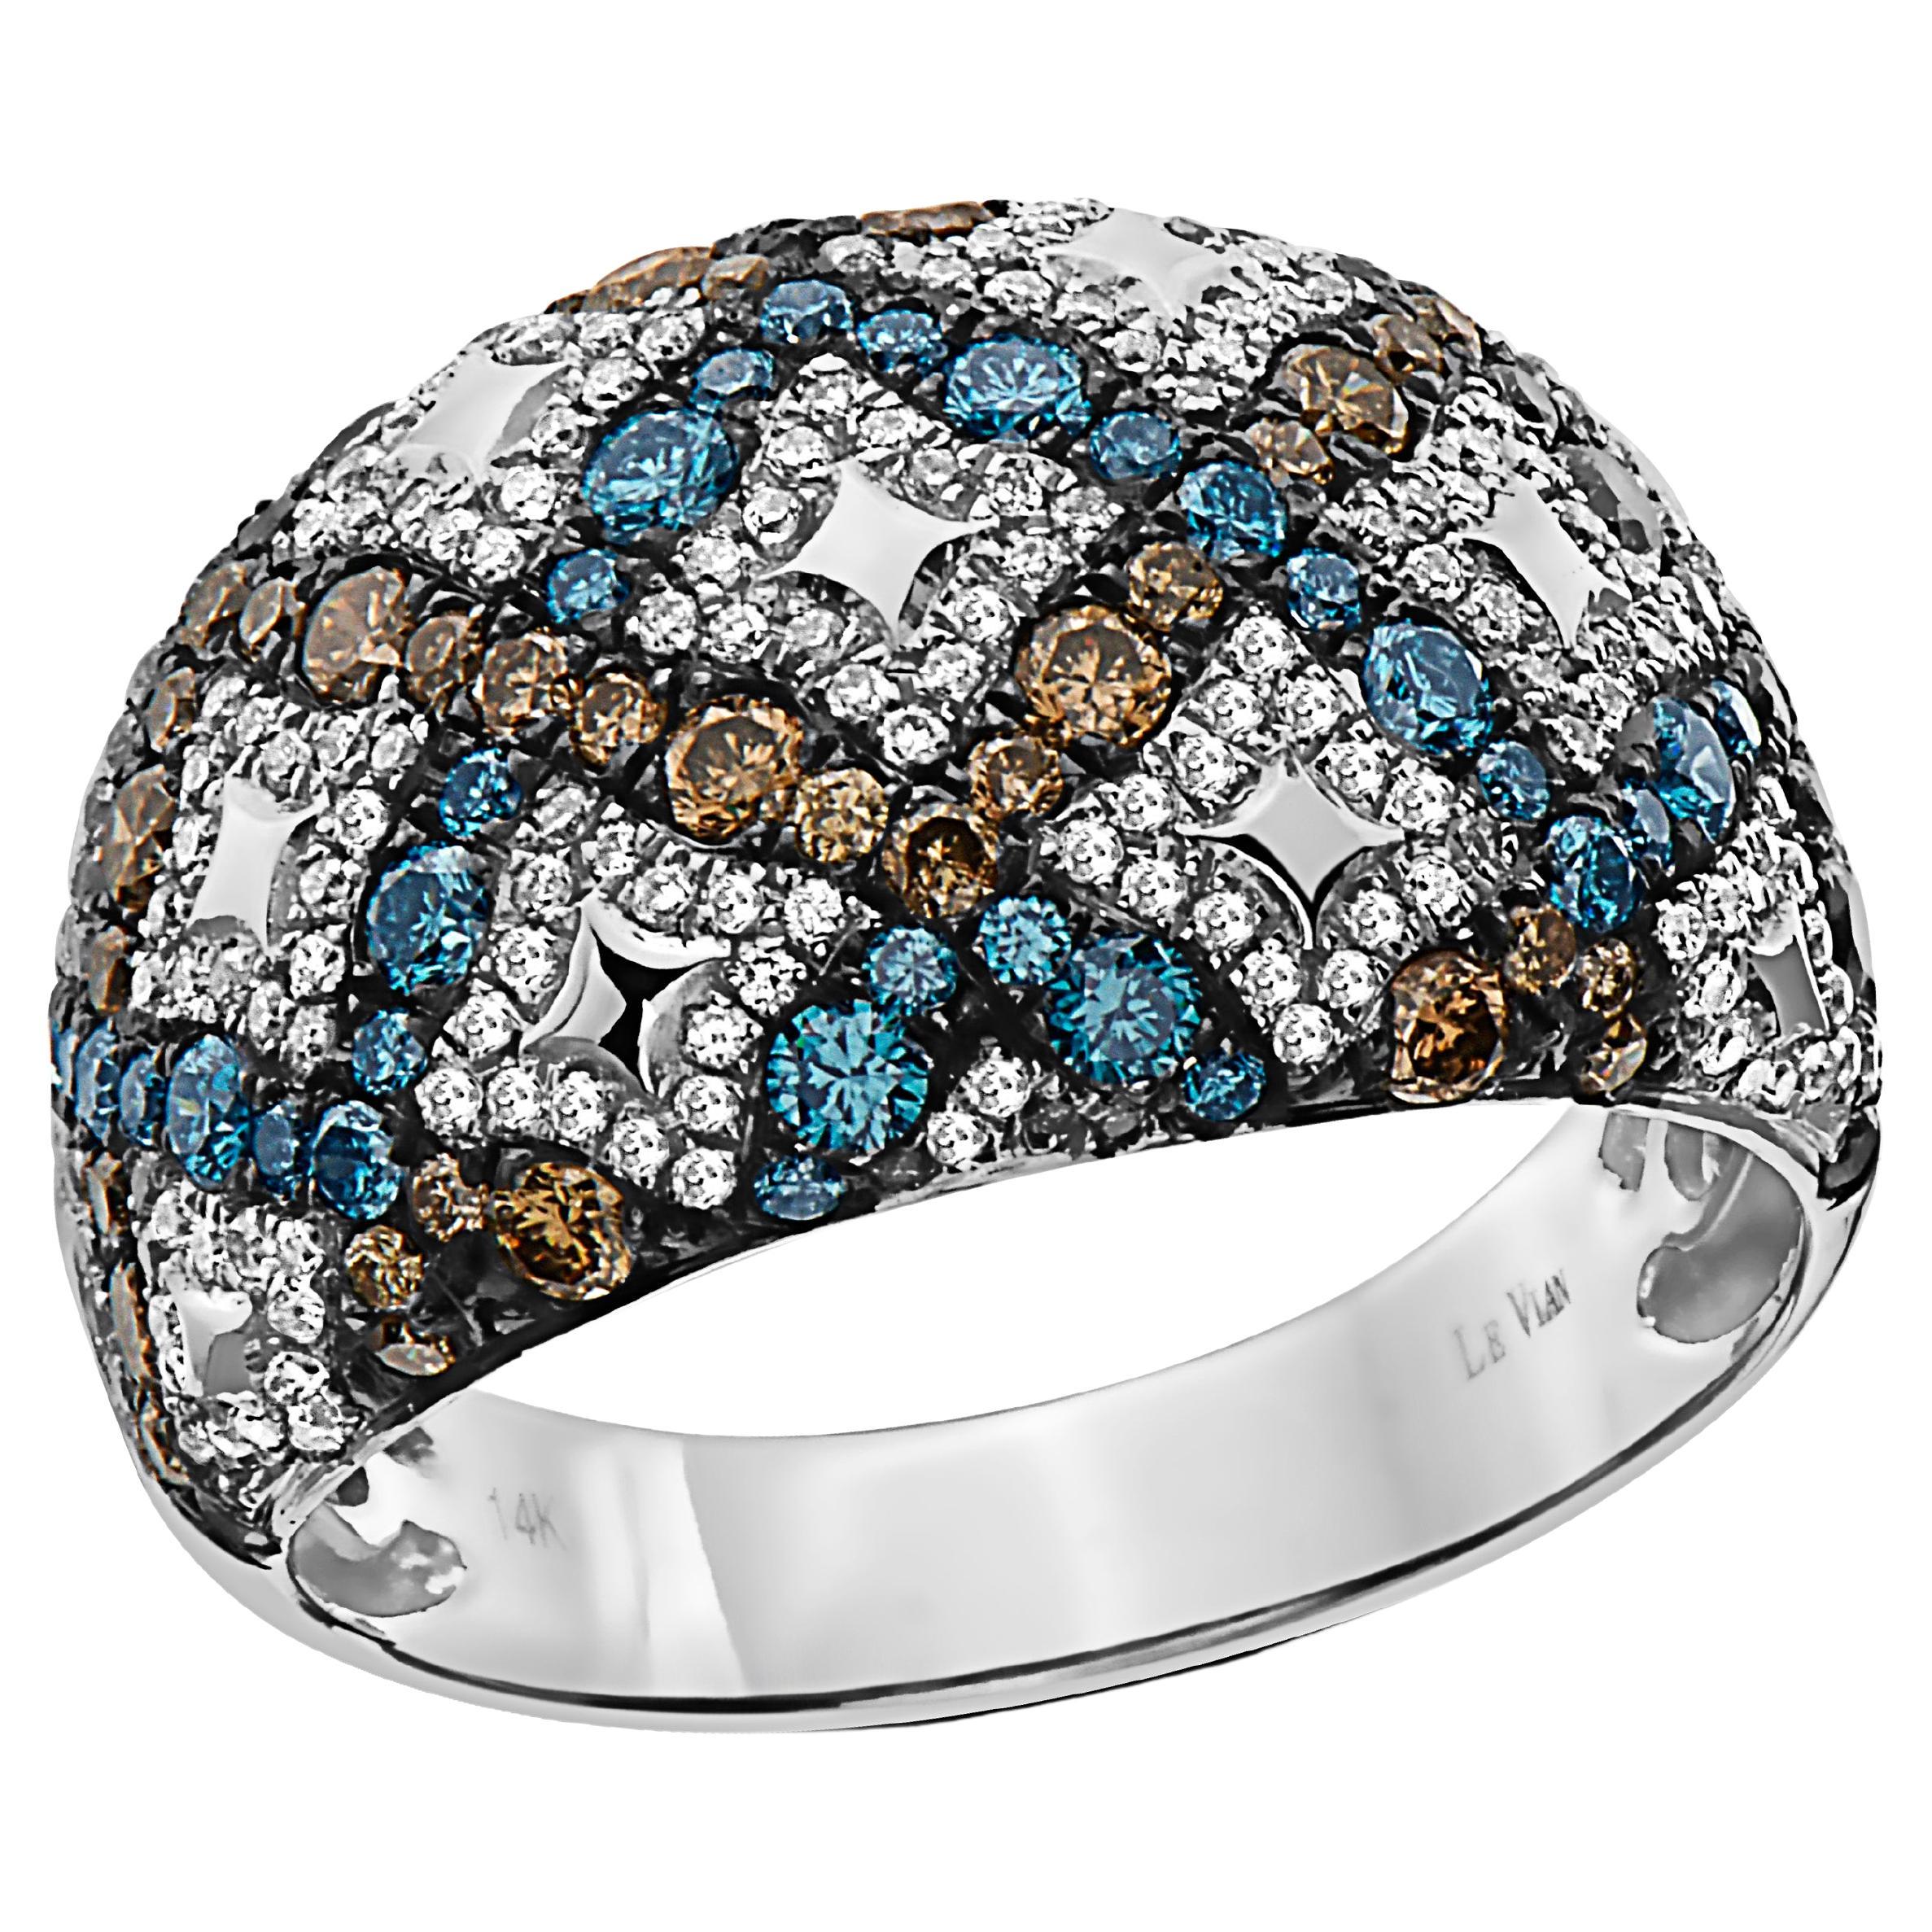 Le Vian Ring Blue Chocolate and White Diamonds Set in 14K White Gold